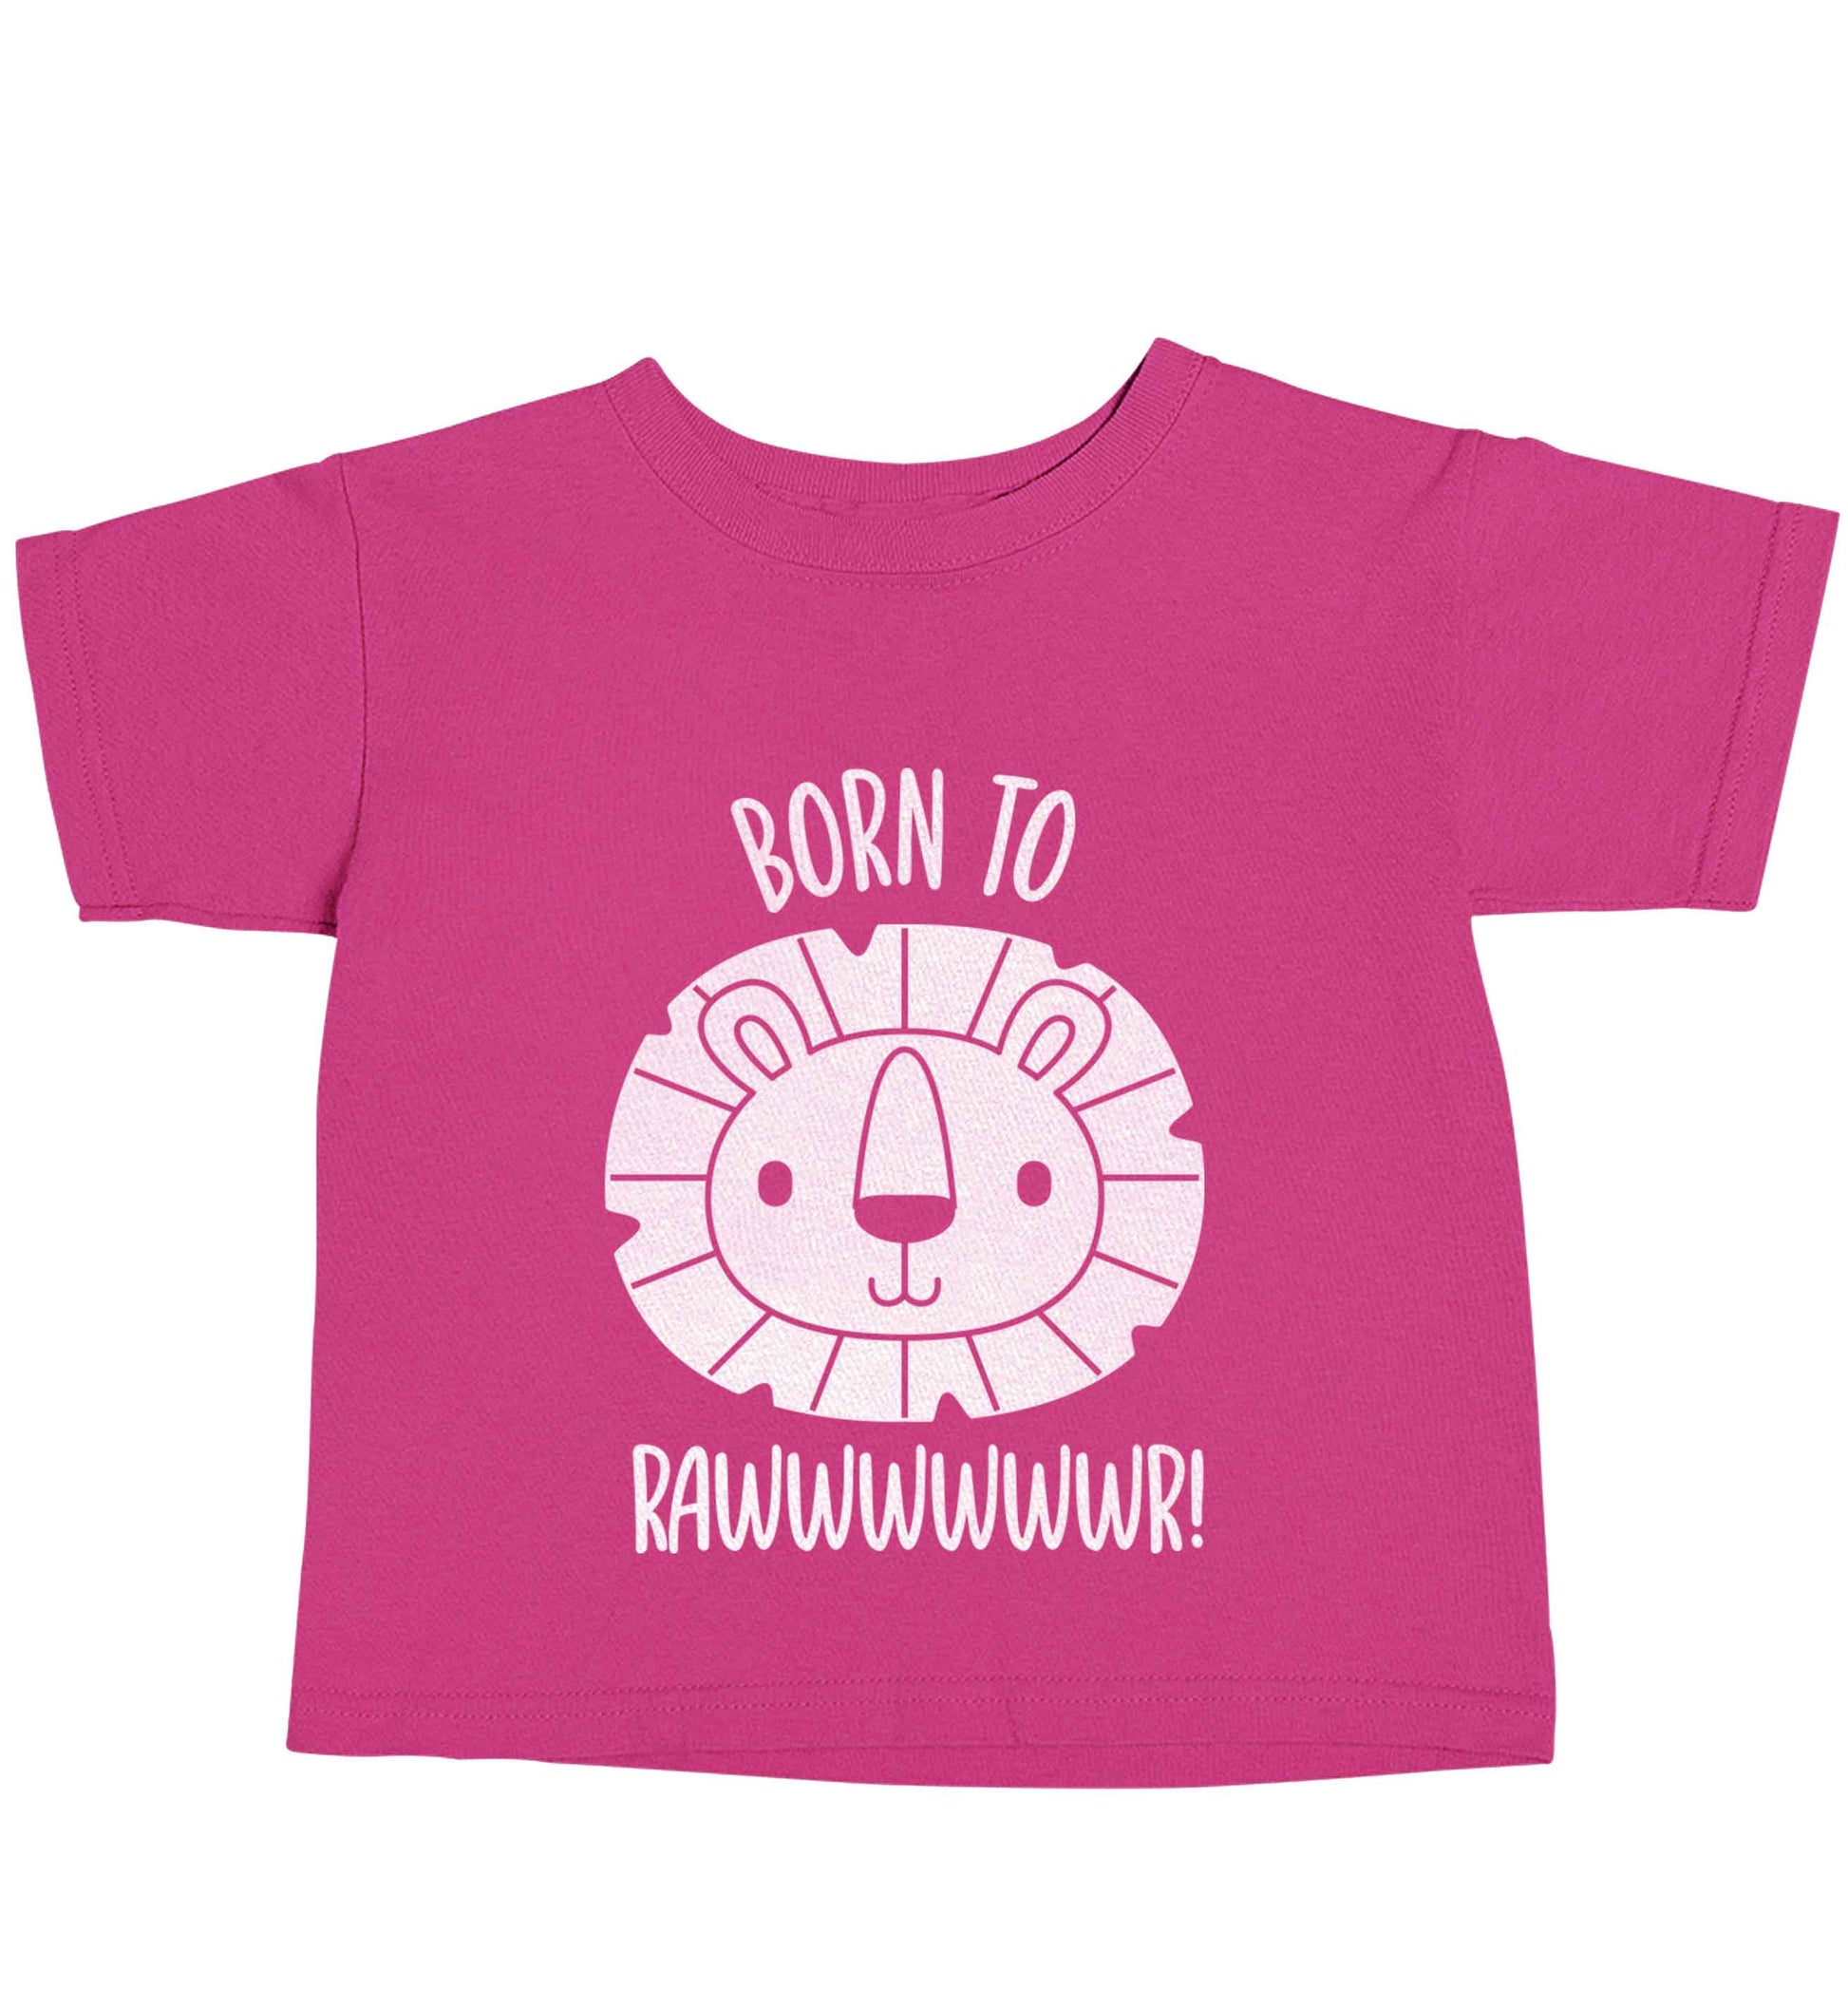 Born to rawr pink baby toddler Tshirt 2 Years